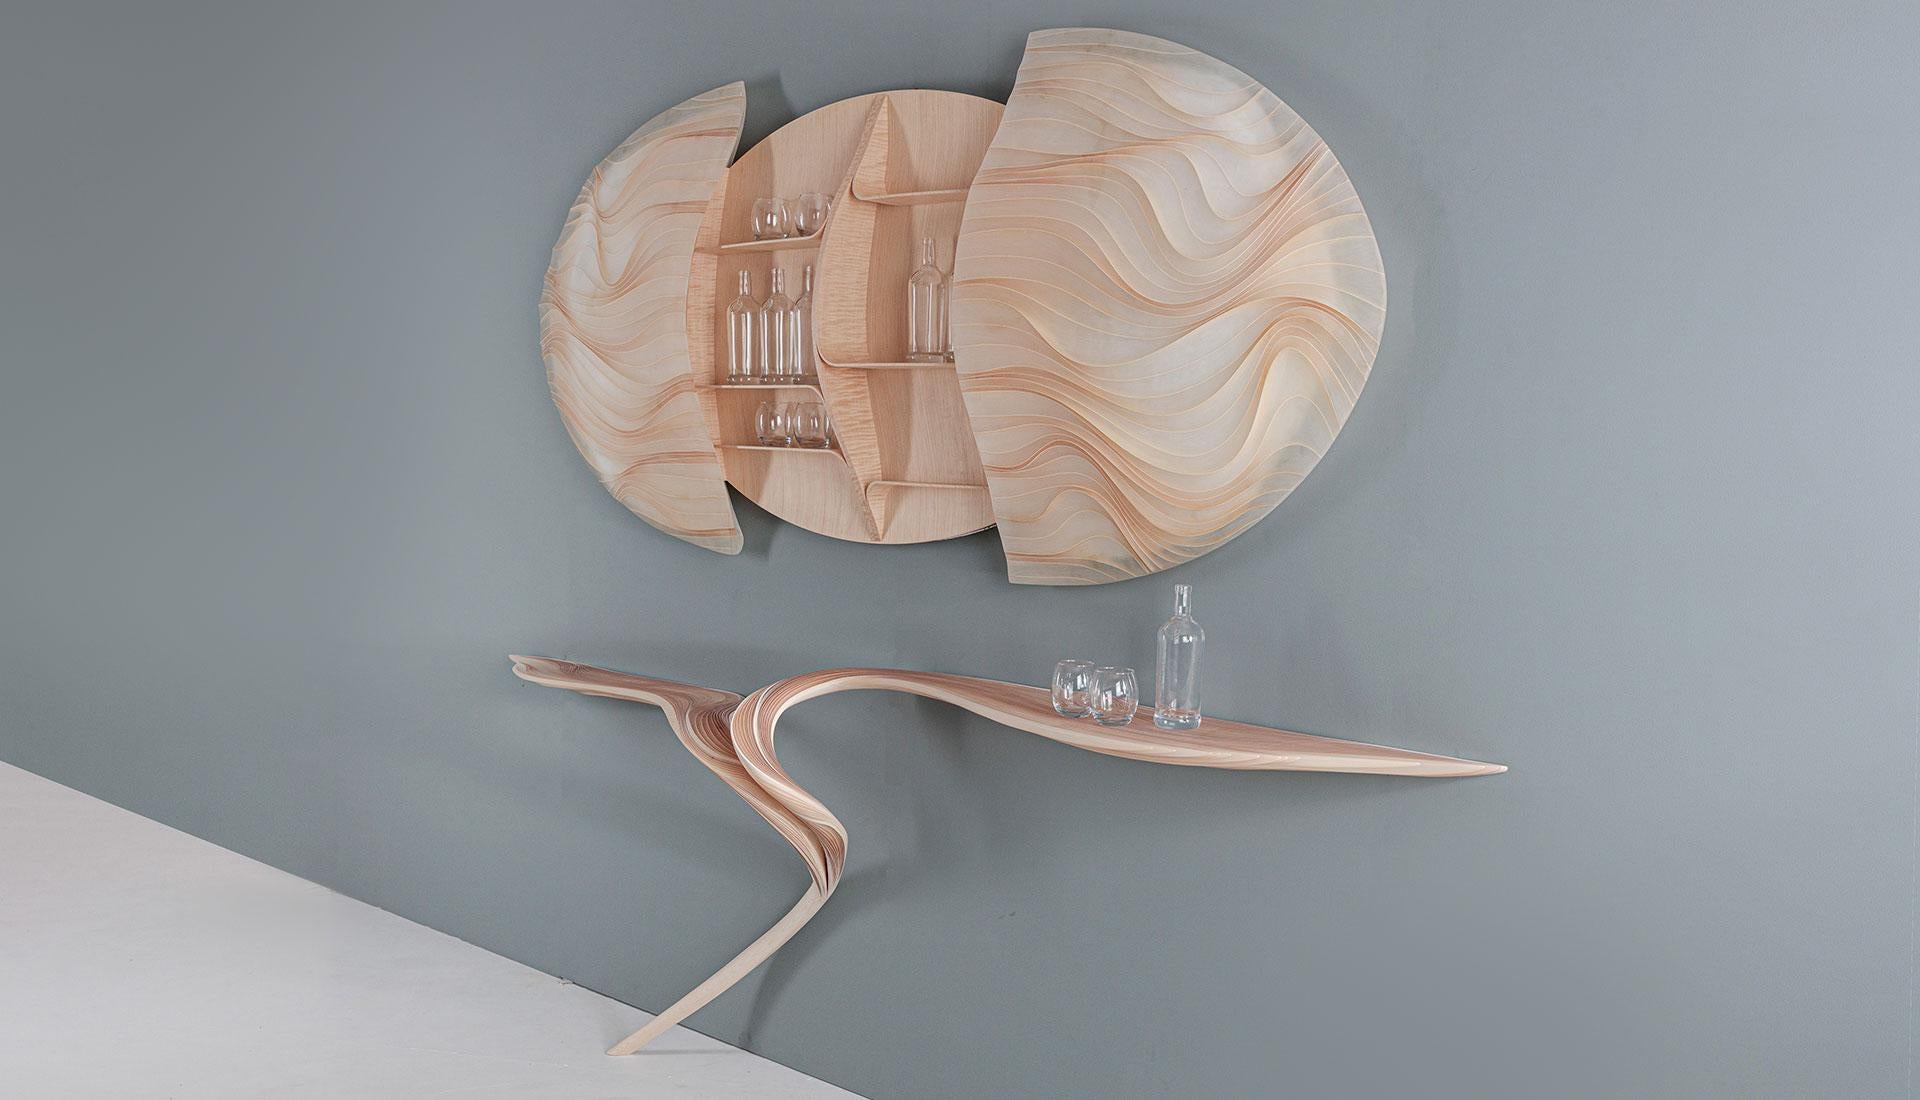 Ethereal series Drinks Cabinet and Bar by international artist Marc Fish. Made from sycamore and resin in an organic sculptural form. Elegant and sinuous the Bar has grace but also an unequivocal energy. The Drinks Cabinet is wall mounted and holds